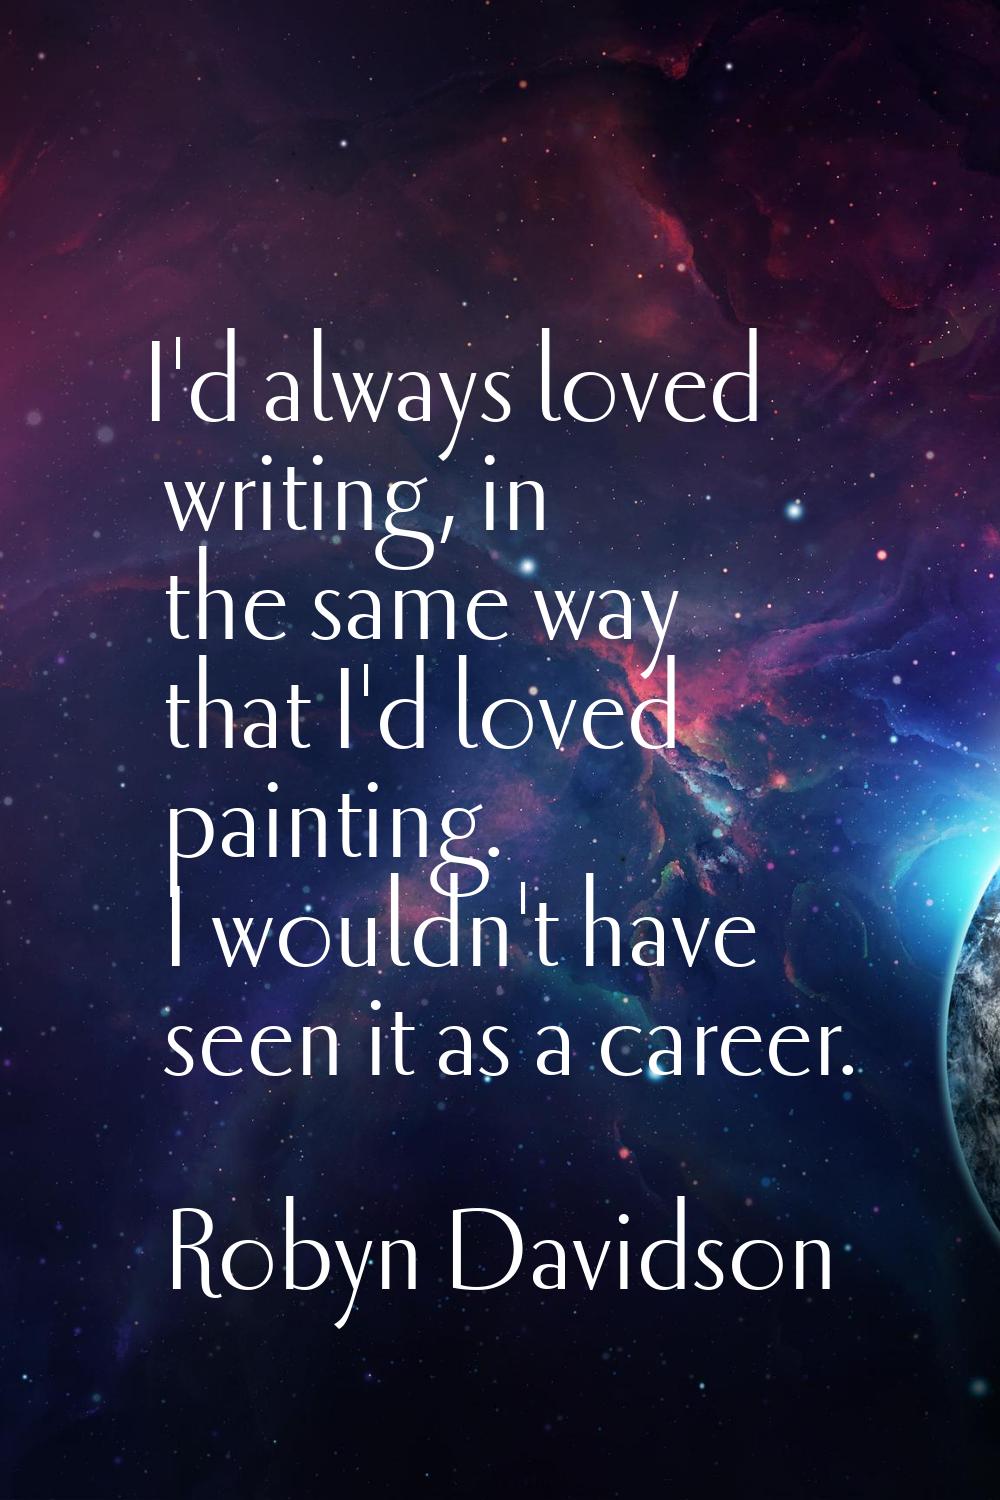 I'd always loved writing, in the same way that I'd loved painting. I wouldn't have seen it as a car